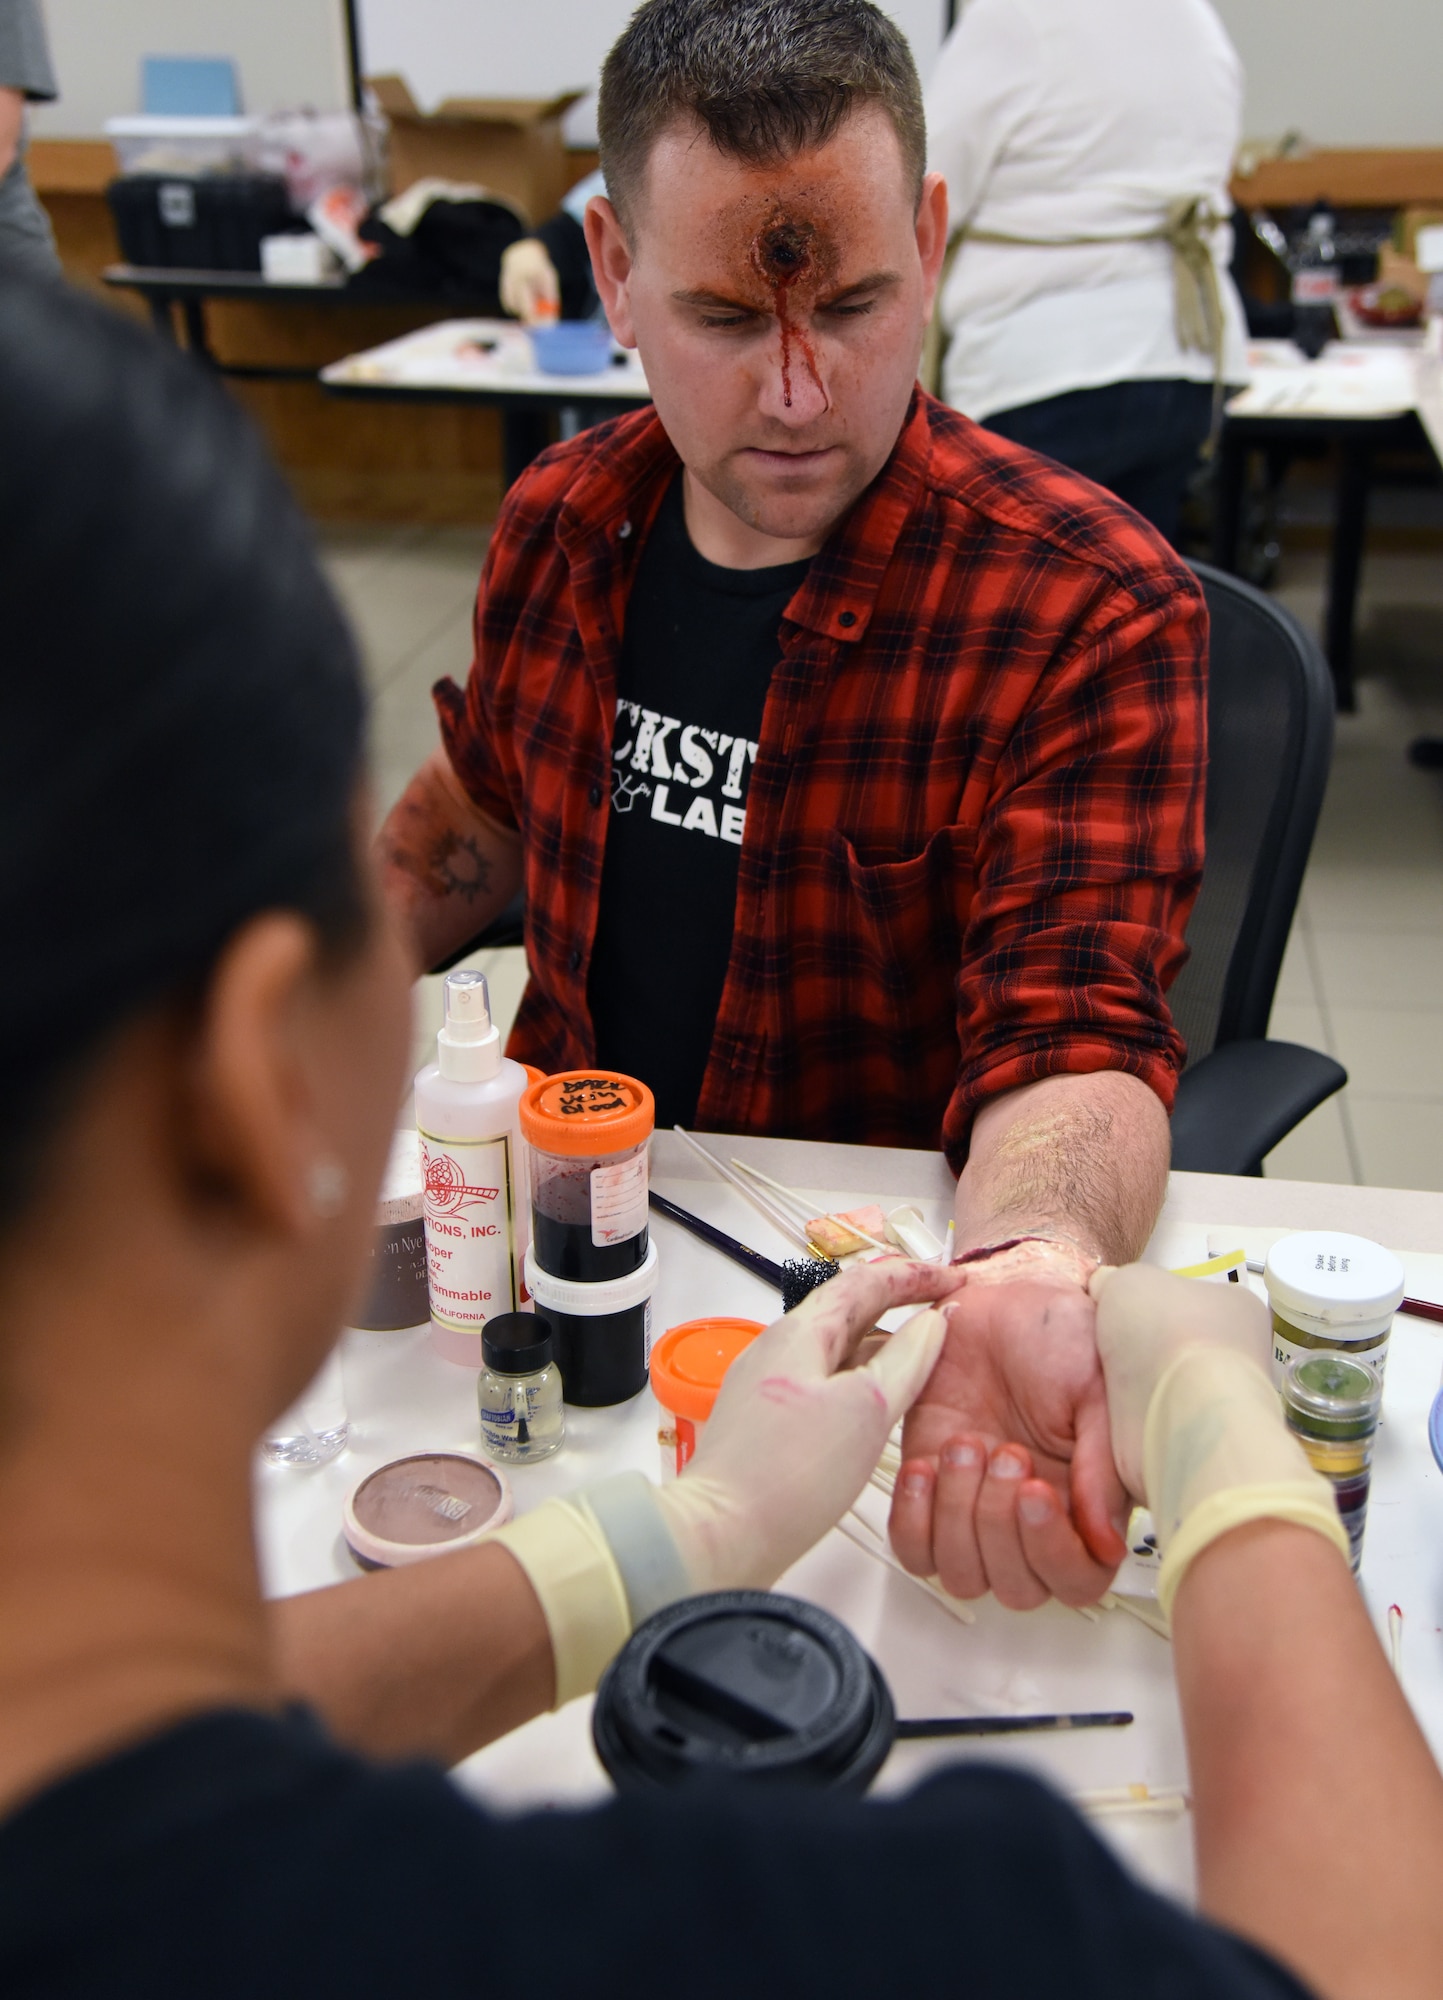 Staff Sgt. Dominque Mason, 81st Medical Operations Squadron neurodiagnostic technologist, applies moulage to Staff Sgt. Matthew Clinesmight, 81st Security Forces Squadron evaluator, during a training session at Allee Hall March 8, 2018, on Keesler Air Force Base, Mississippi. The session was held to teach volunteers how to apply moulage on exercise “casualties” to provide emergency responders with a more realistic training experience. (U.S. Air Force photo by Kemberly Groue)